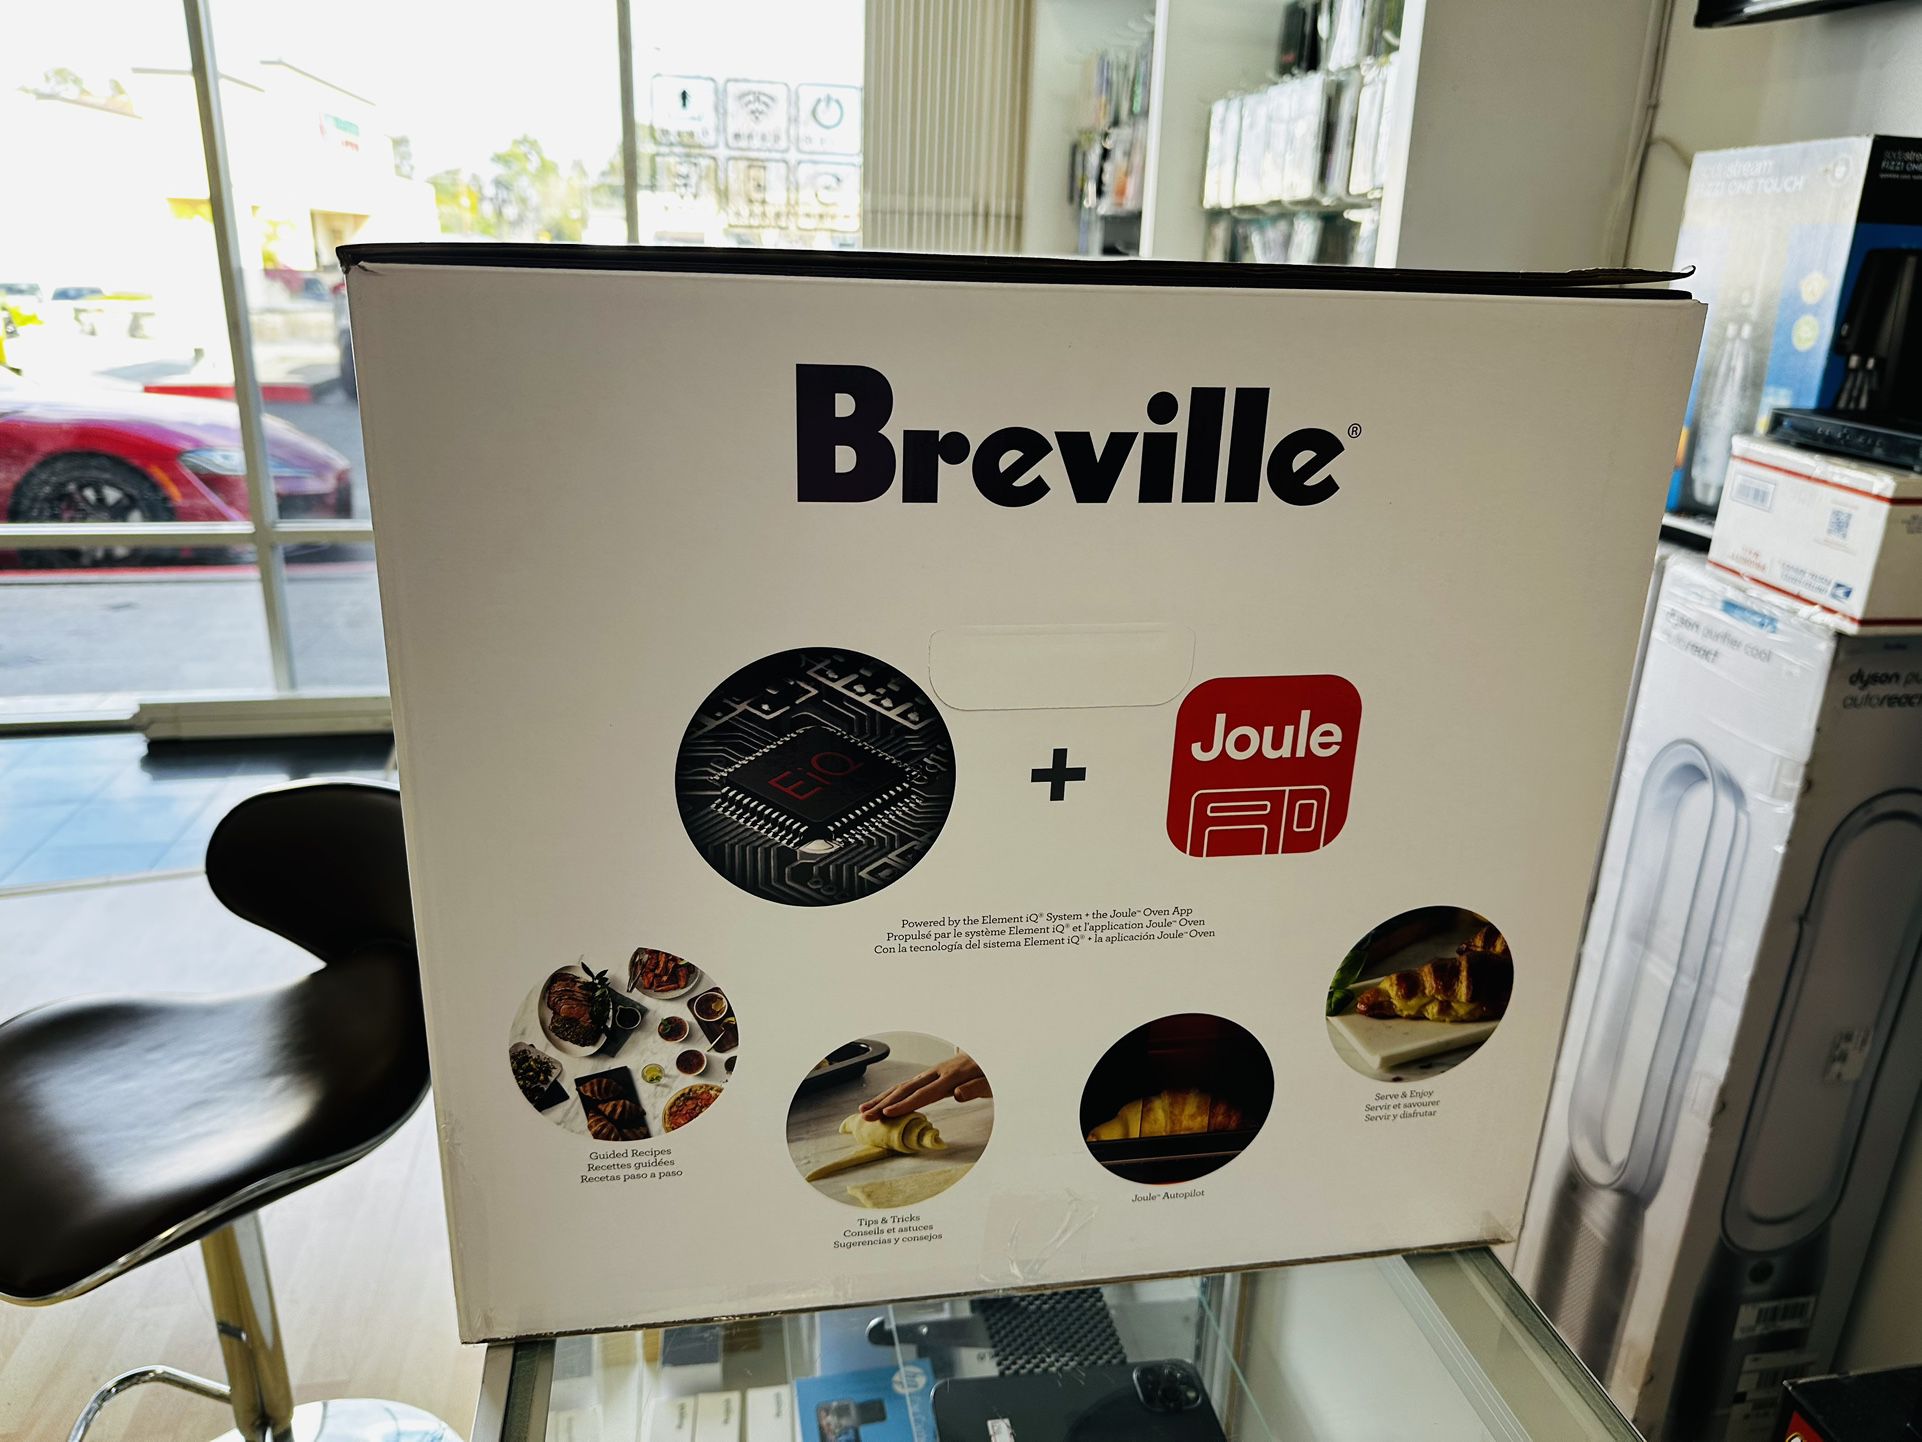 Breville Joule Oven Air Fryer Pro BOV950 for Sale in West Hollywood, CA -  OfferUp